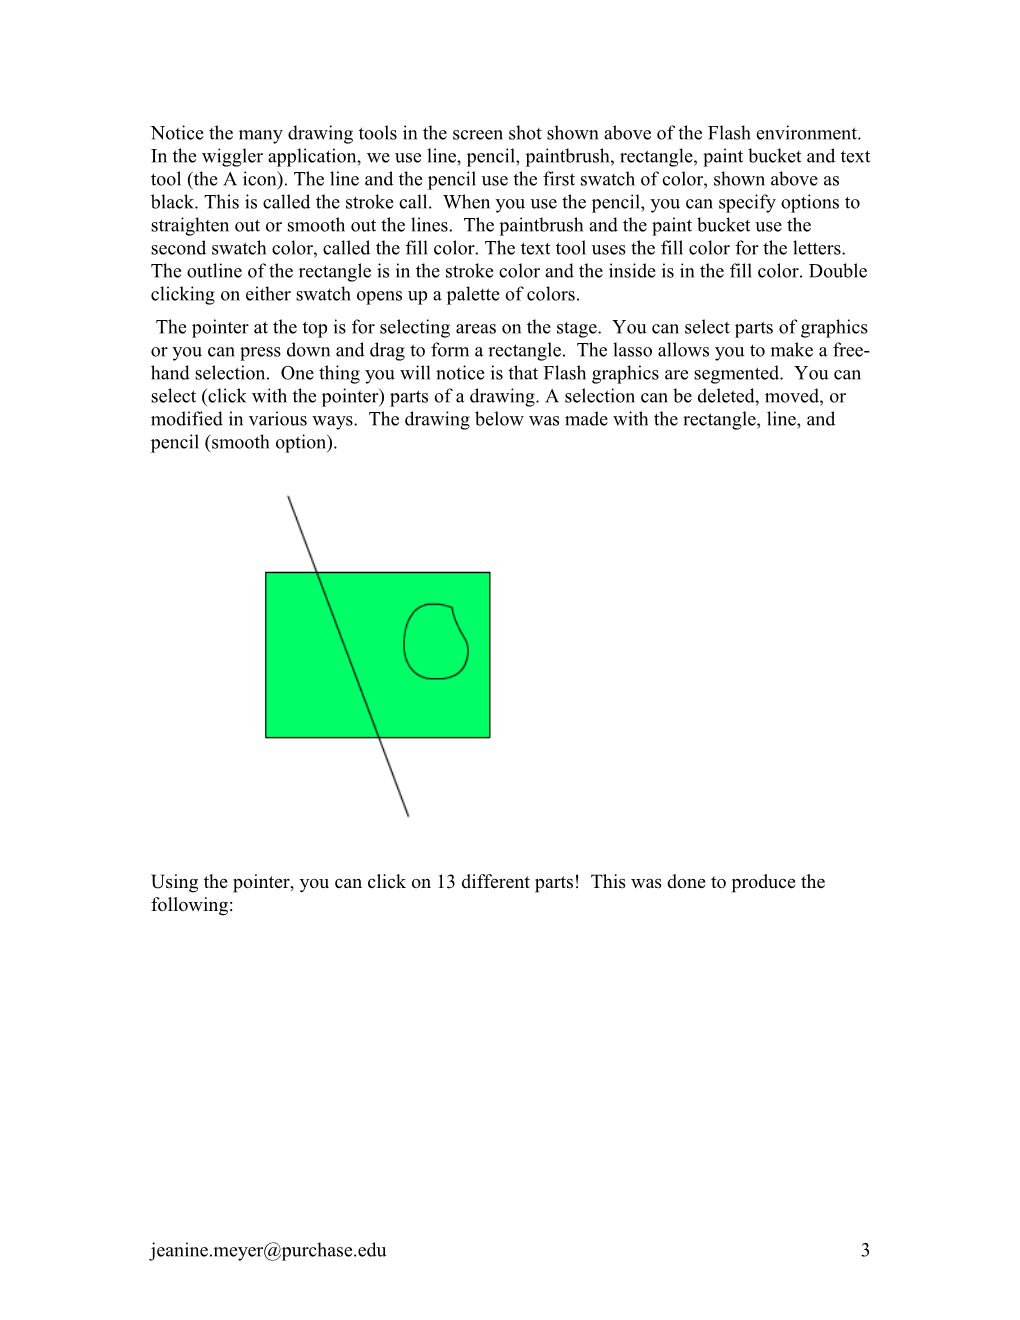 Using Making Directions for Origami As an Example in Teaching Programming